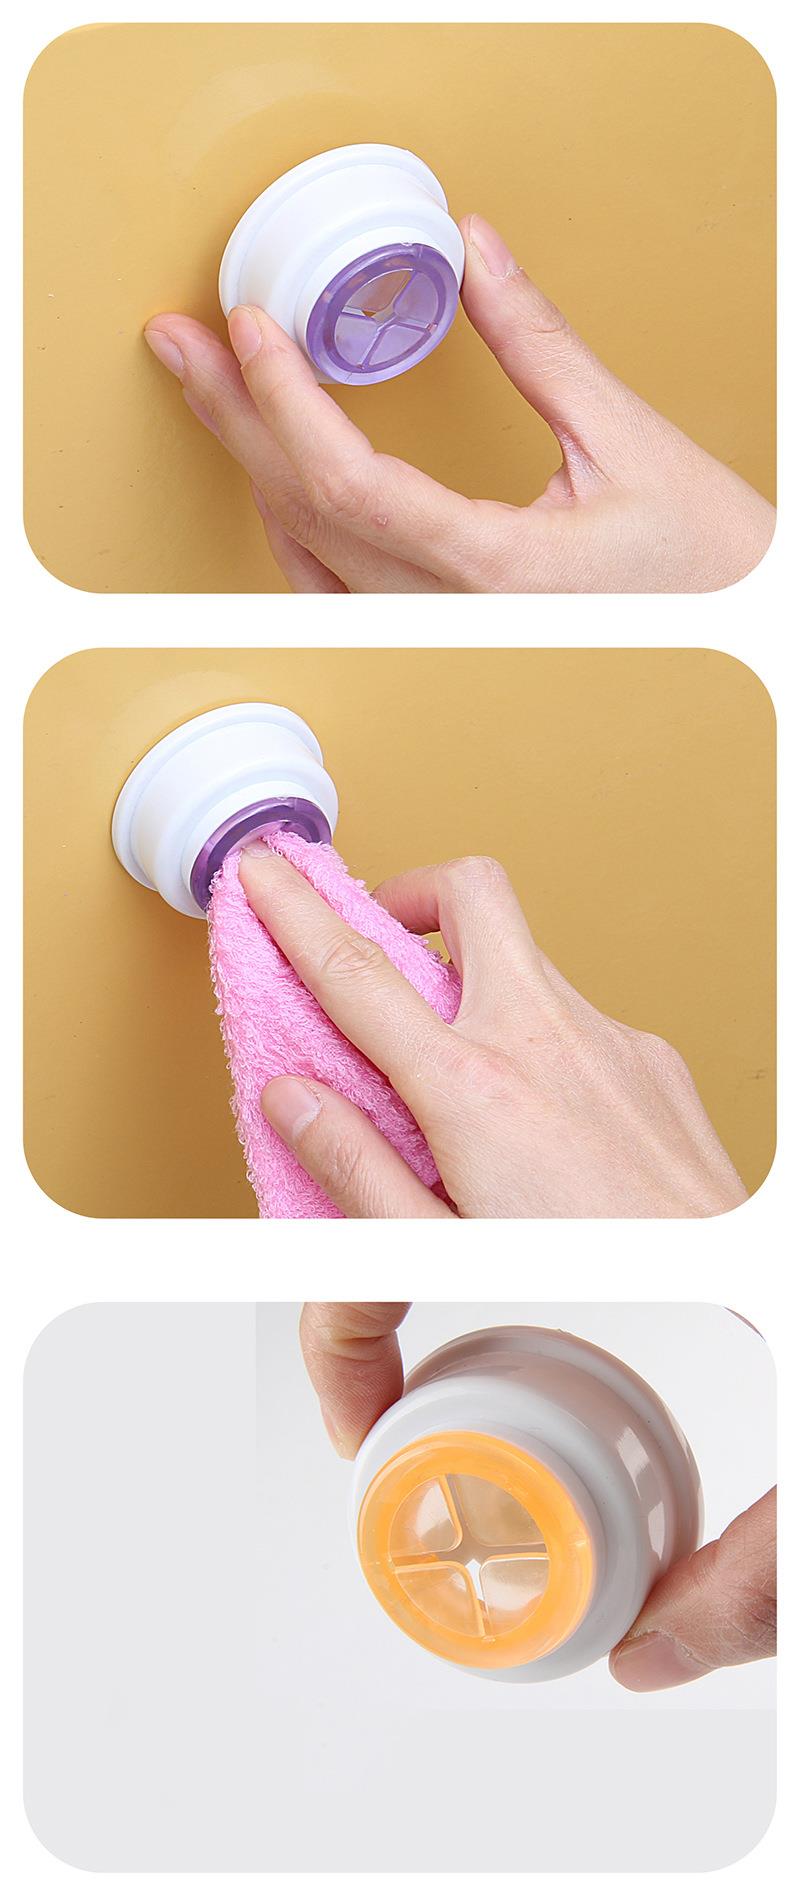 Easy Stick Facecloth And Hand Towel Holder